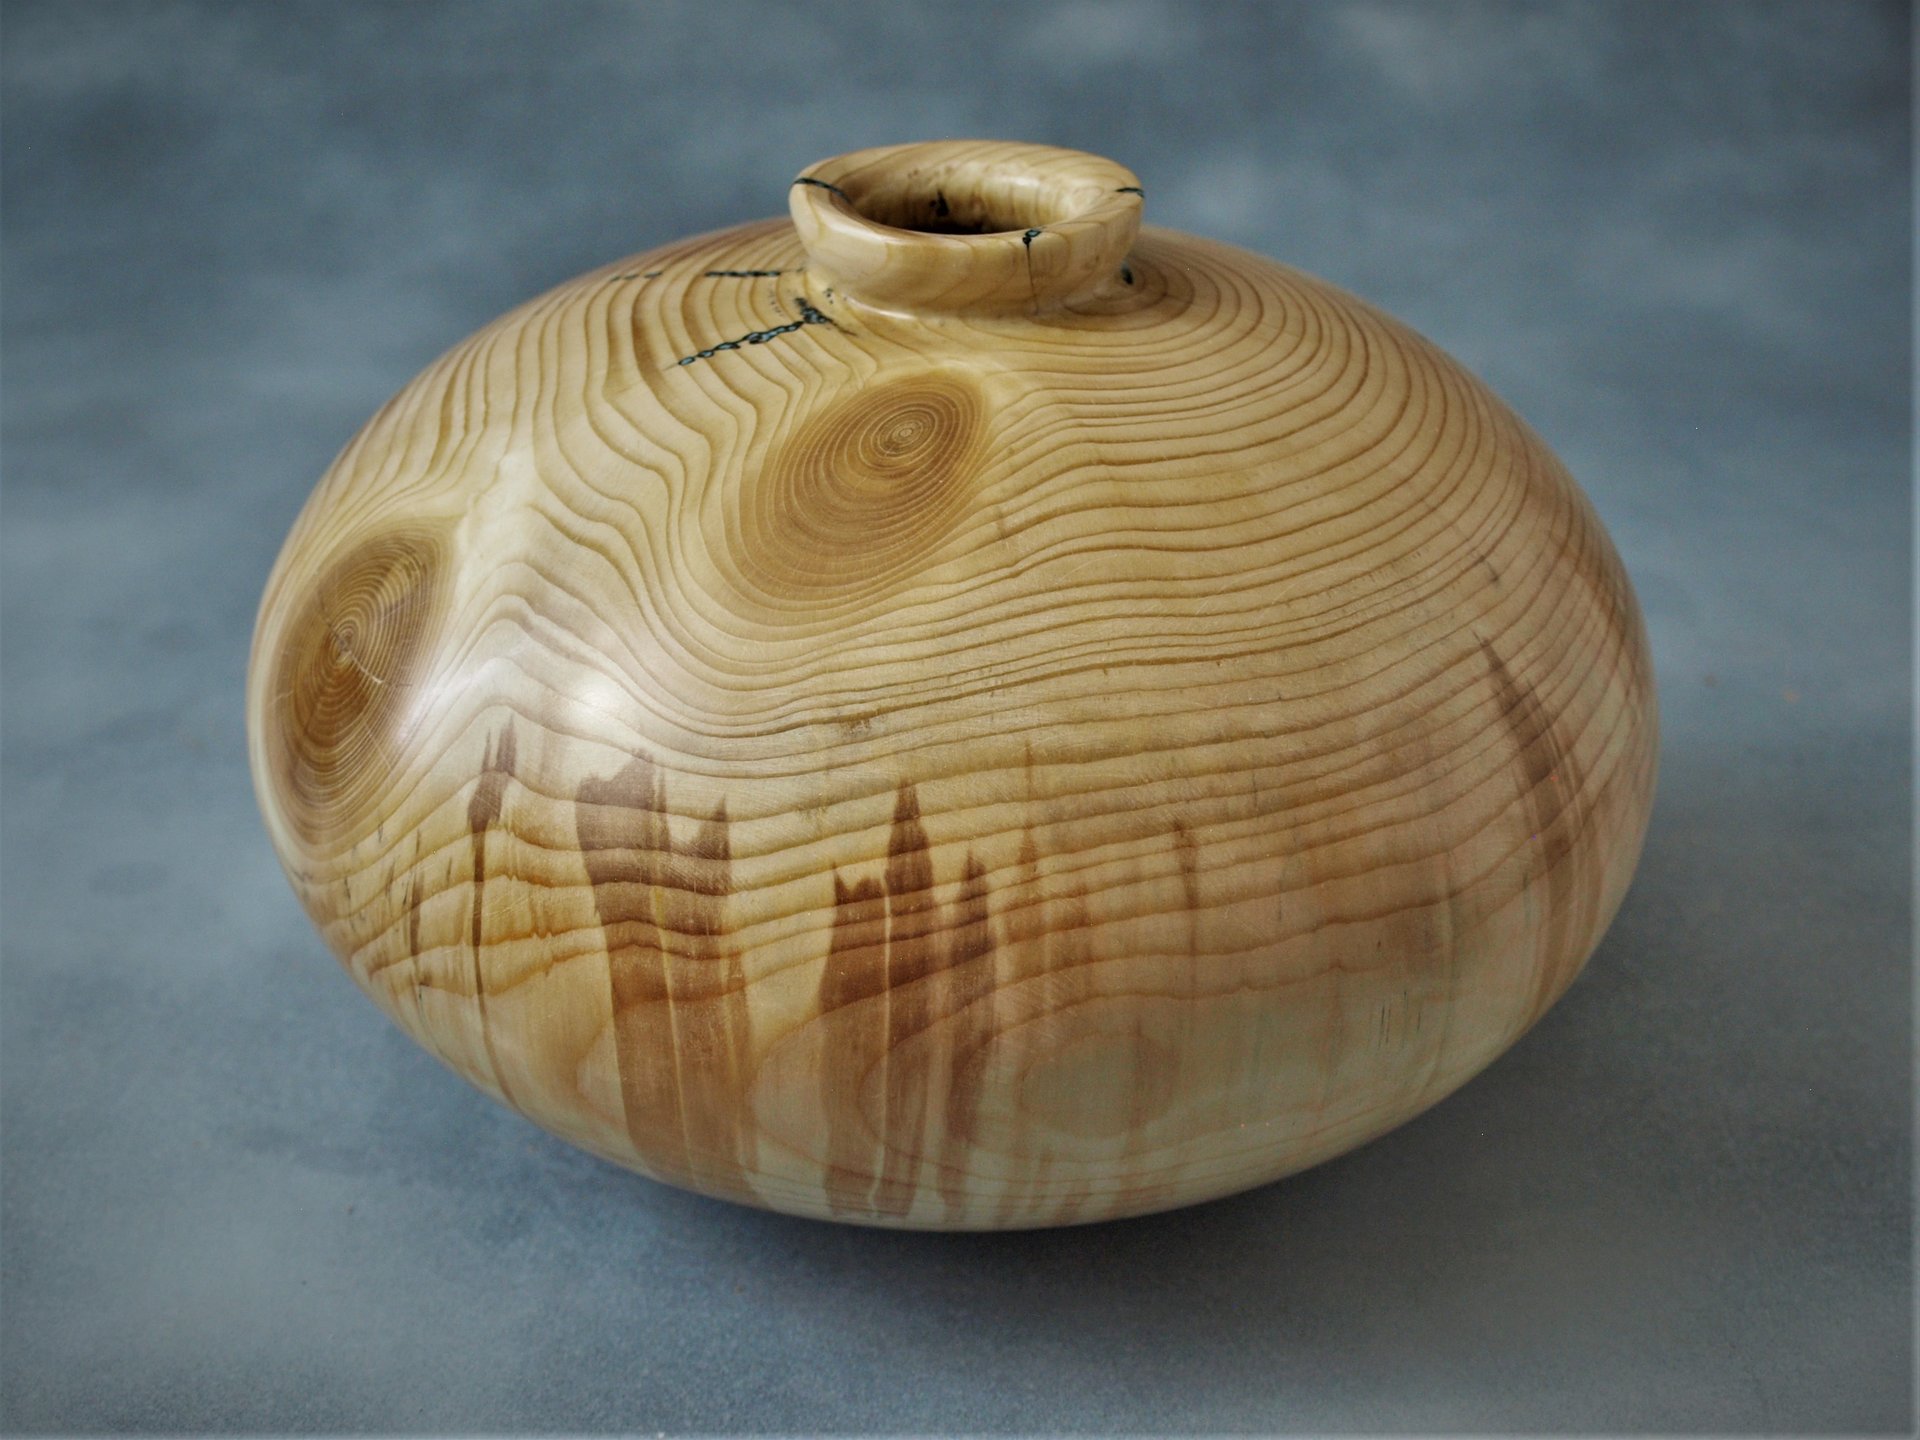 Another pine hollow form.